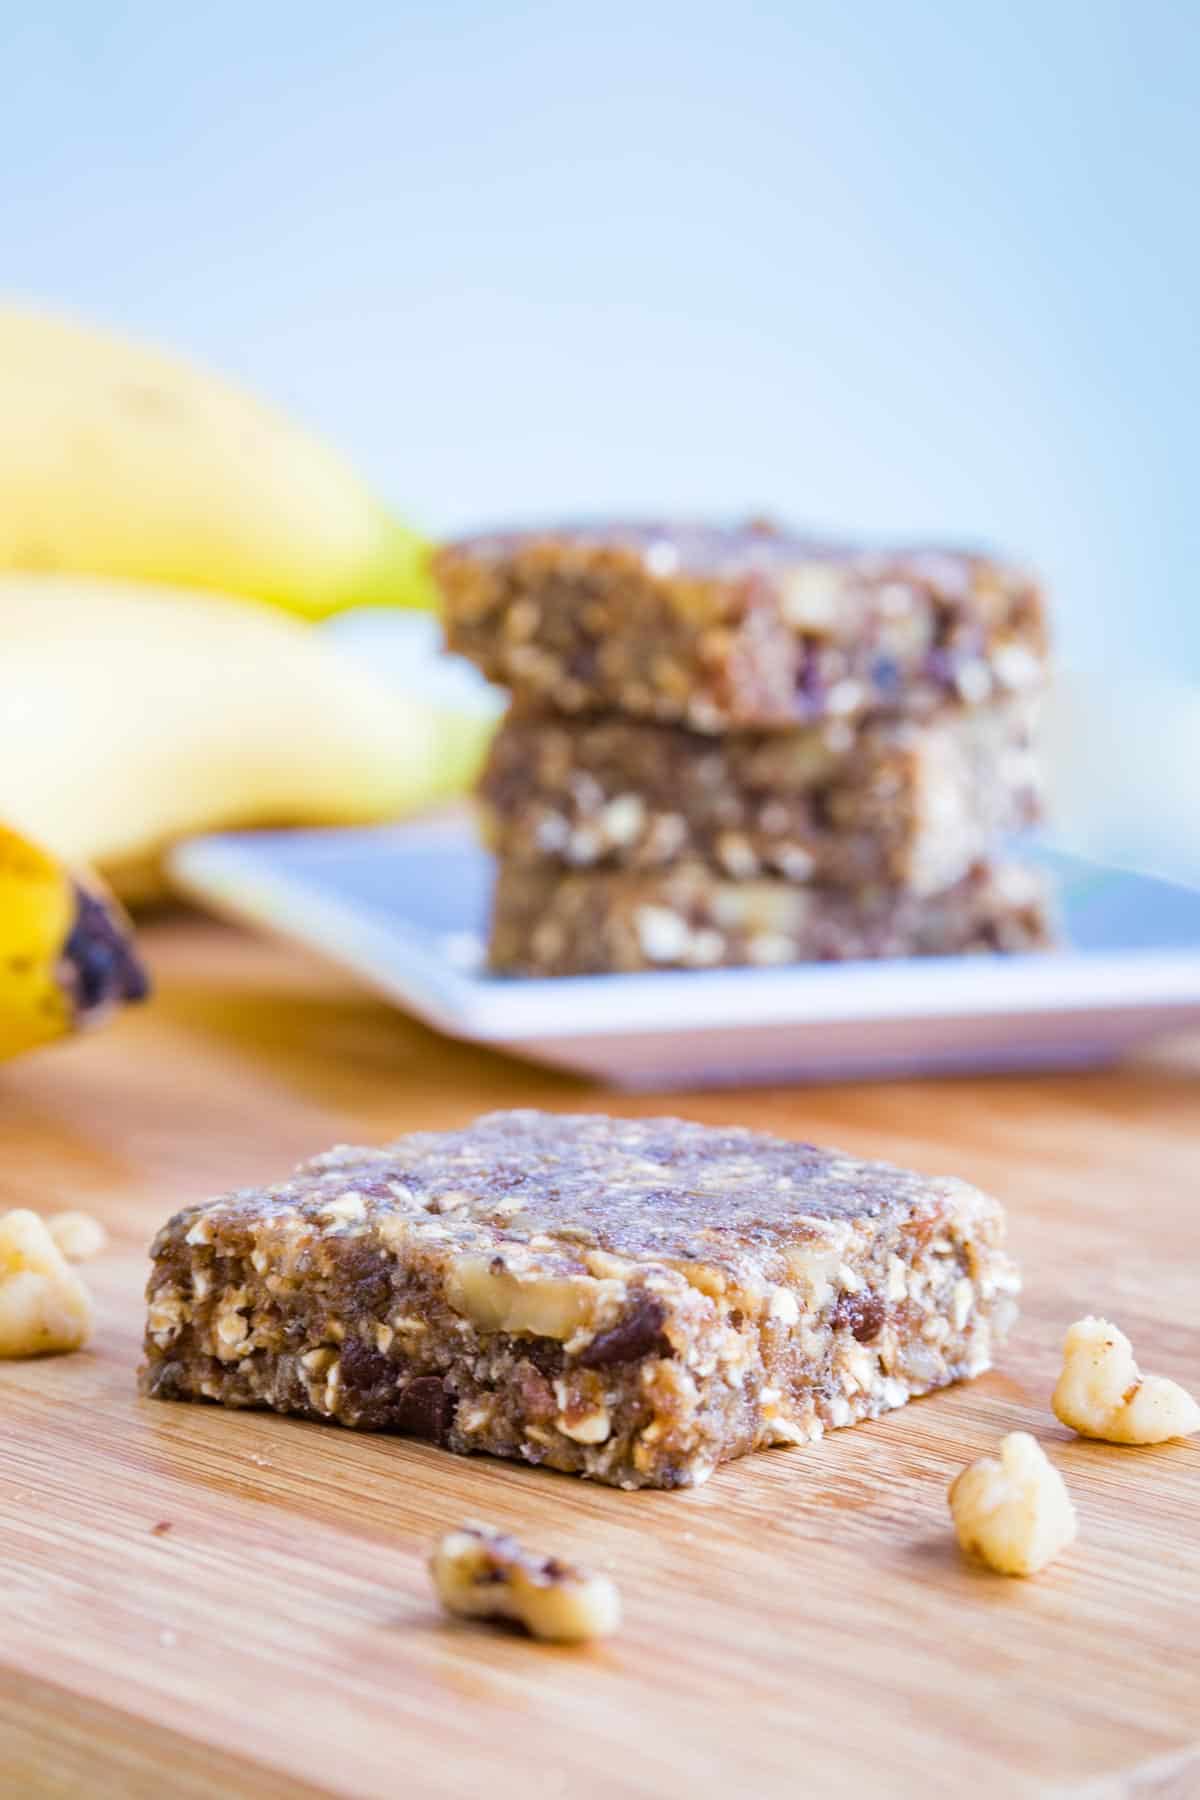 One banana snack bar with chopped walnuts around it and a stack of three energy bars on a plate in the background.